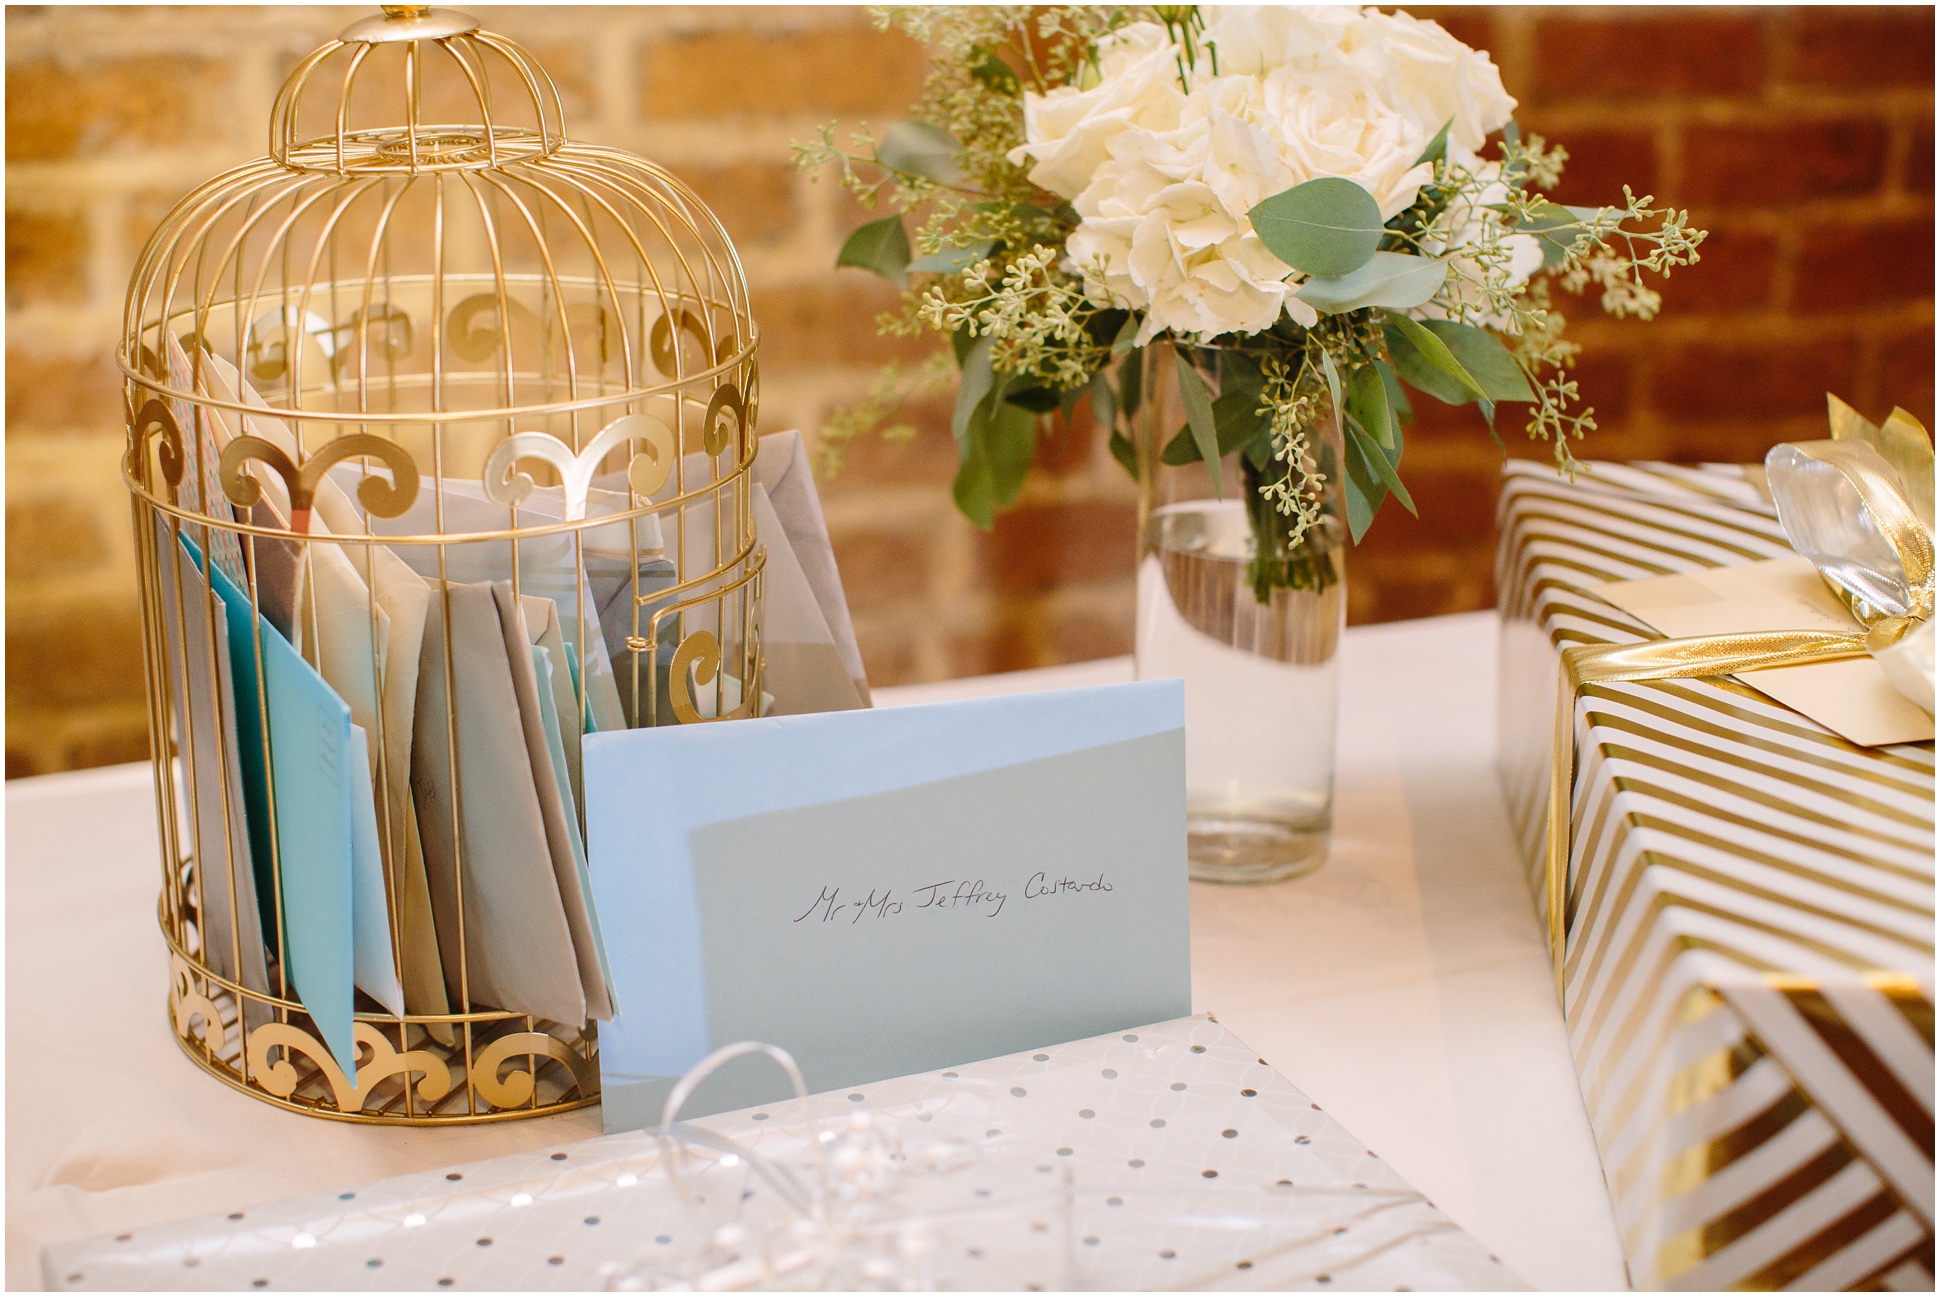 Two Chics Photography | 8 Tips for Personalizing your Wedding | www.twochicsphotography.com